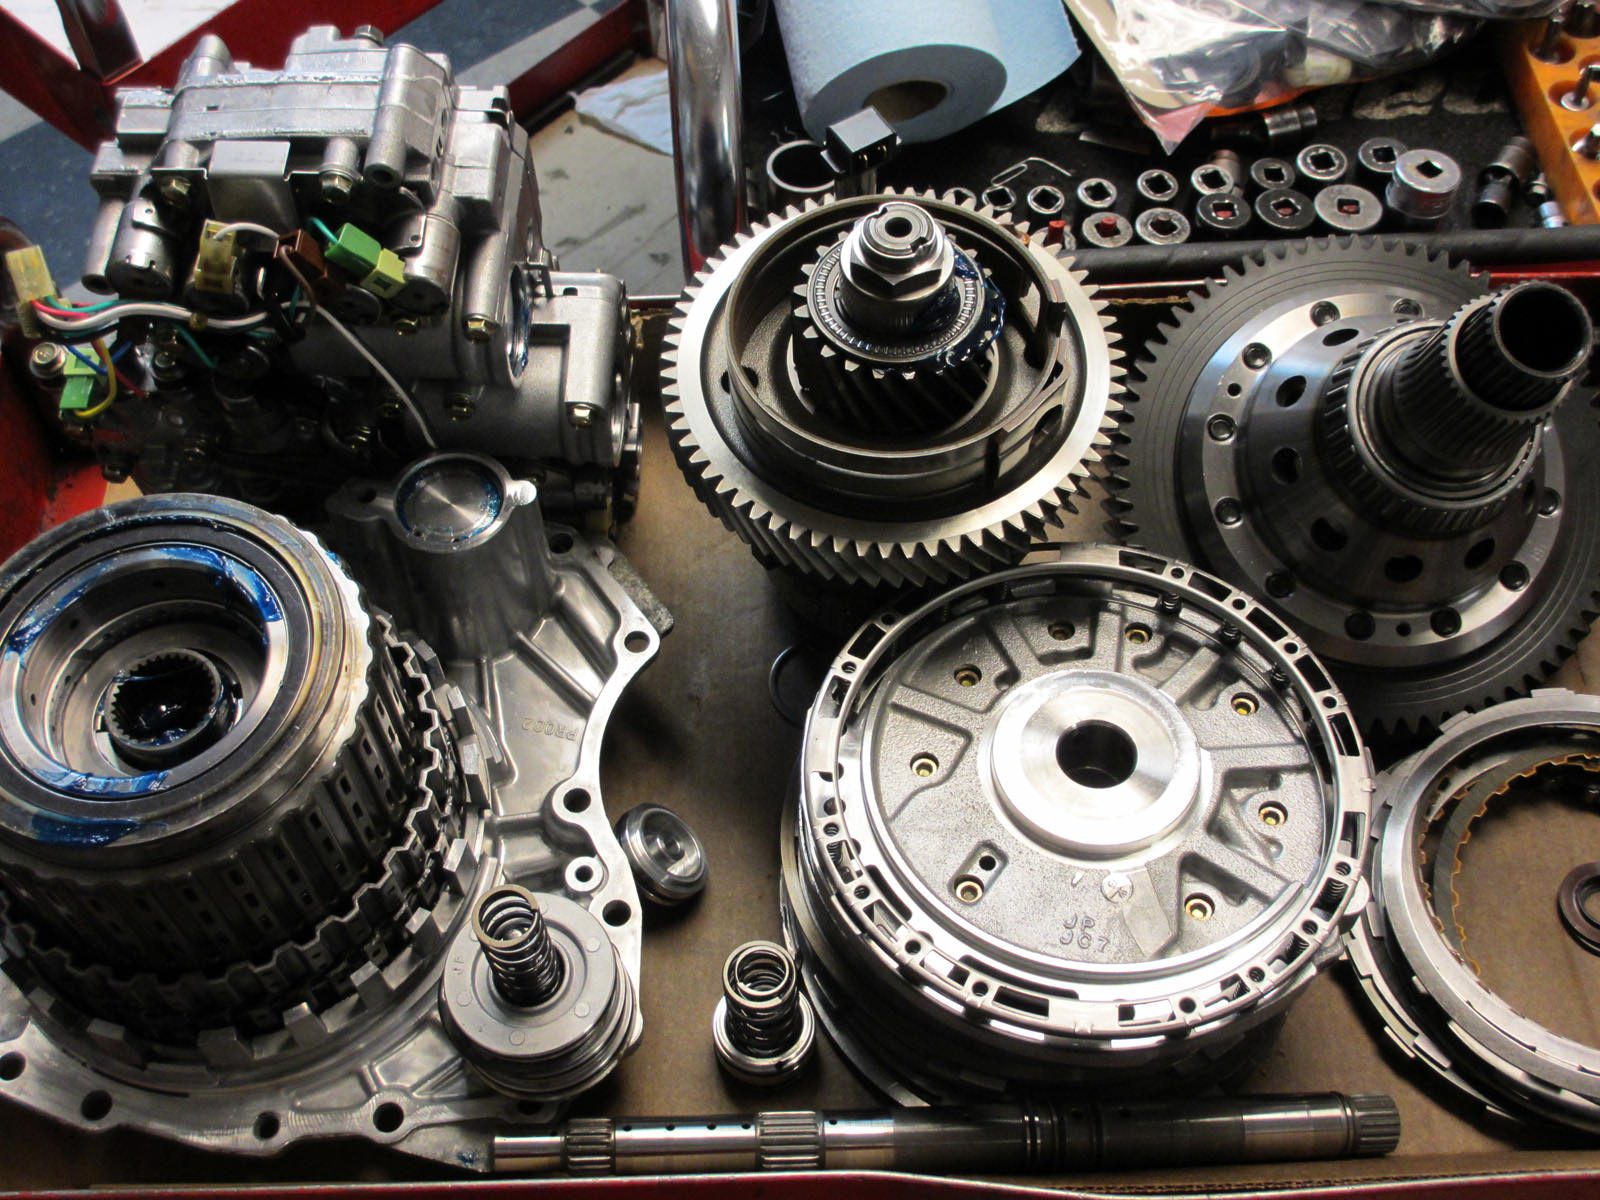 A disassembled transmission's parts